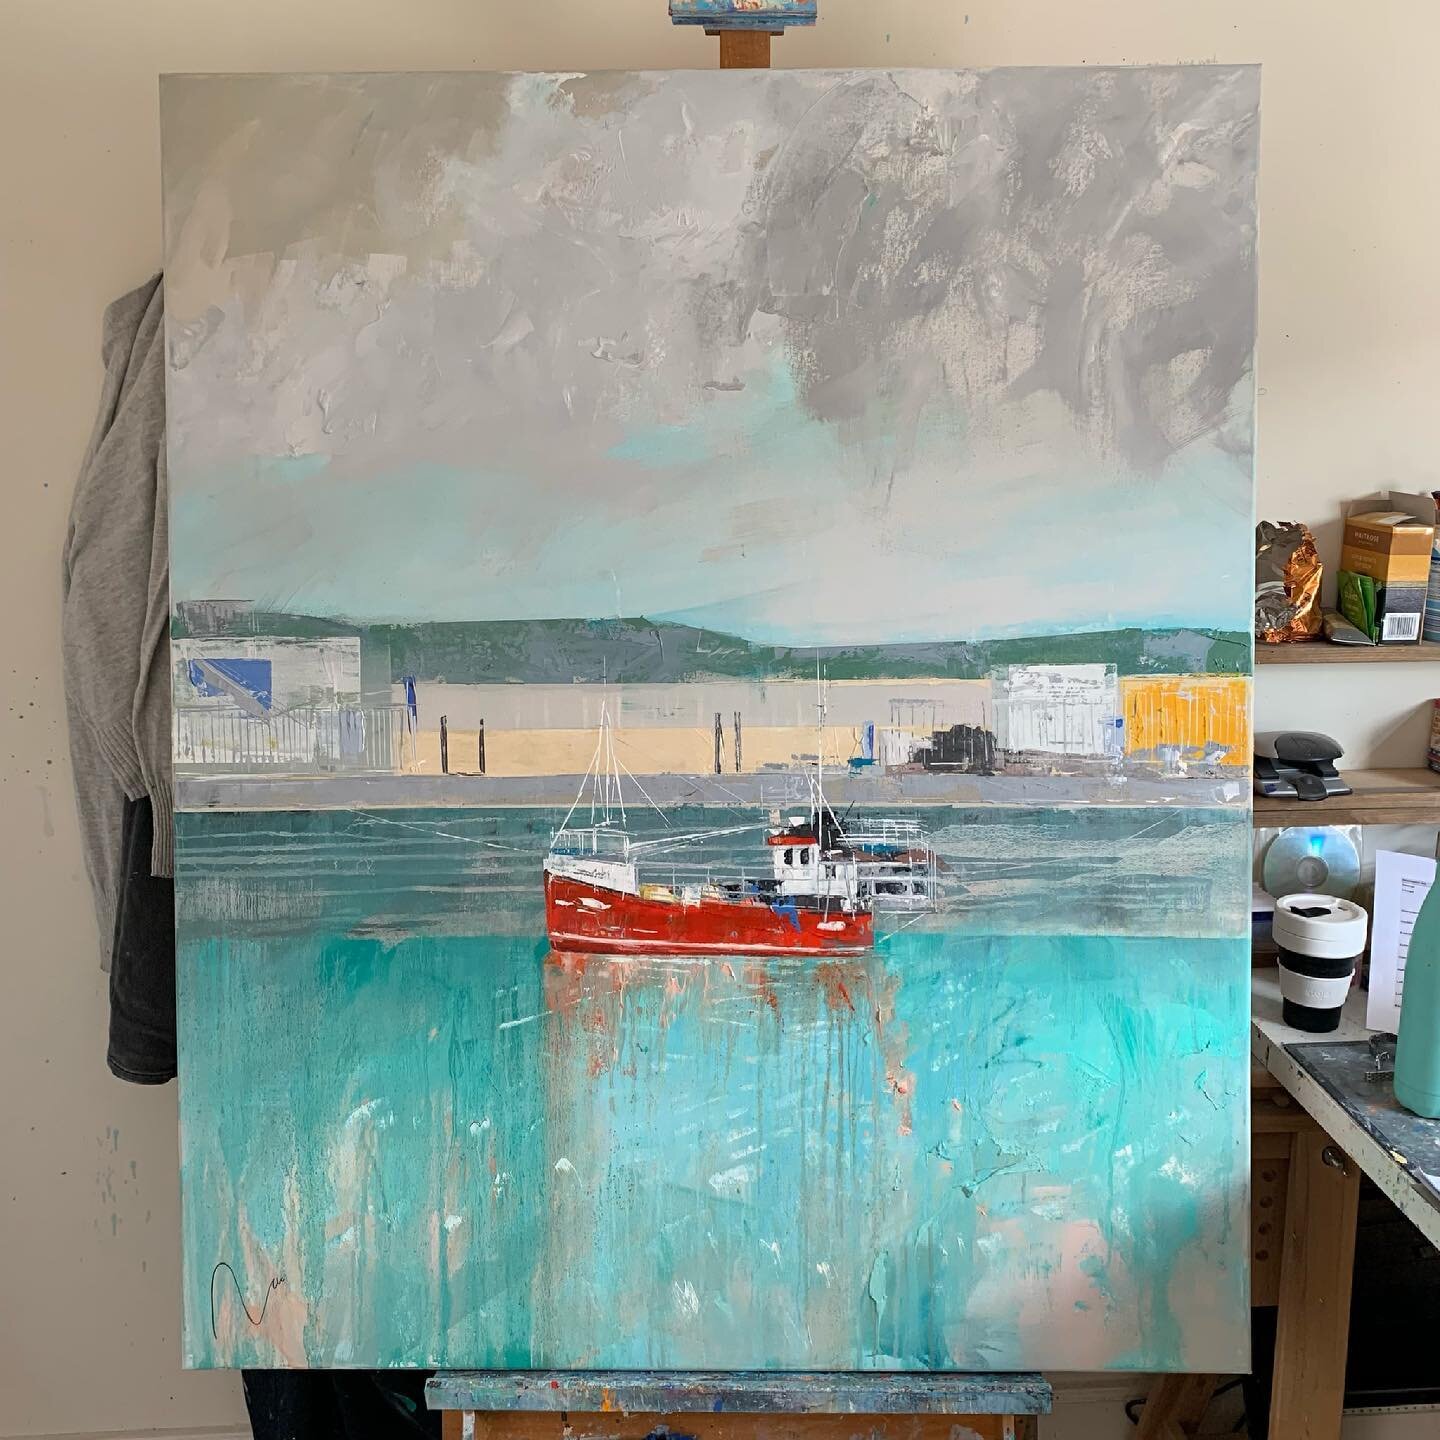 PADSTOW HARBOUR

Inspired by a glorious trip there last month

#naomcdowellart #cornwall #londonartist #oilpaint #oiloncanvas #cornwallcoast #colour #abstractpainting #devon #contemporaryart #landscapeart #landscapepainting #boats #instaart #instaart